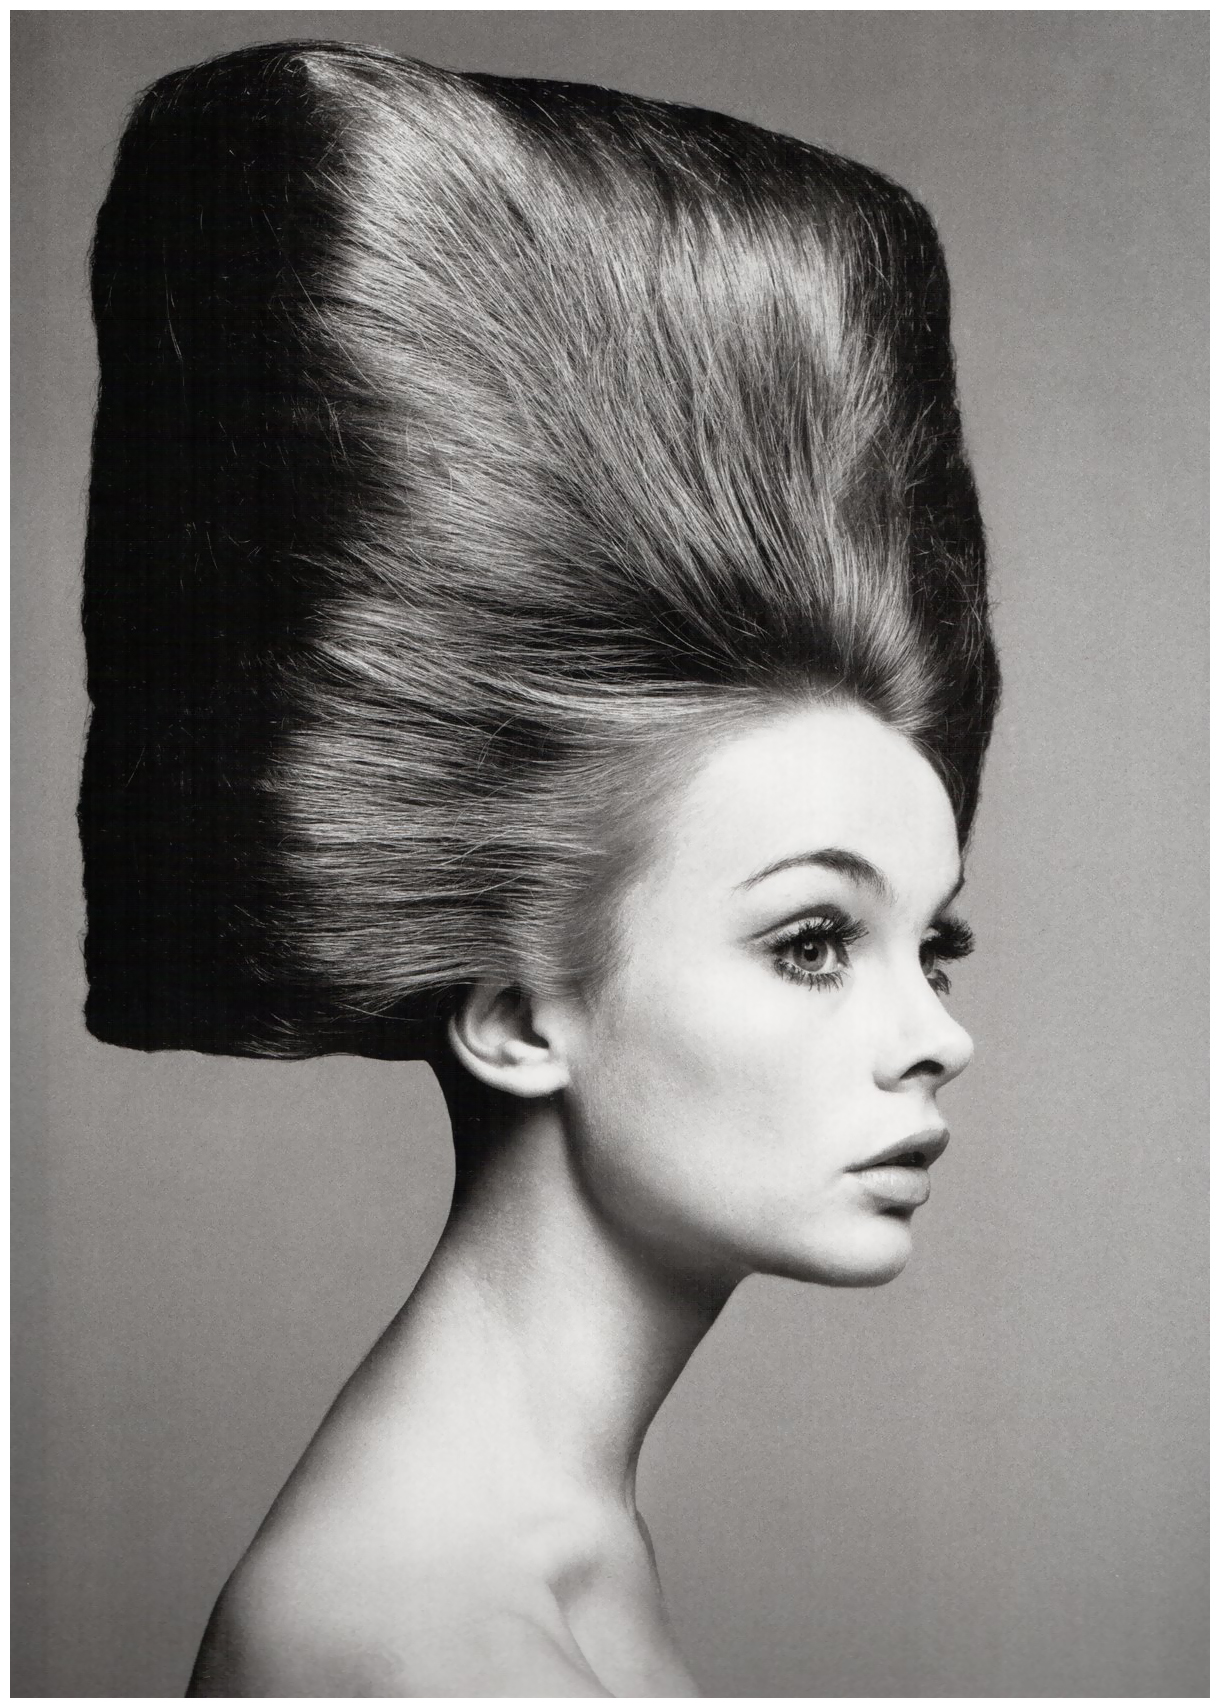 twiggy-is-shot-by-richard-avedon-for-vogue-us-in-the-august-1965-issue.jpg